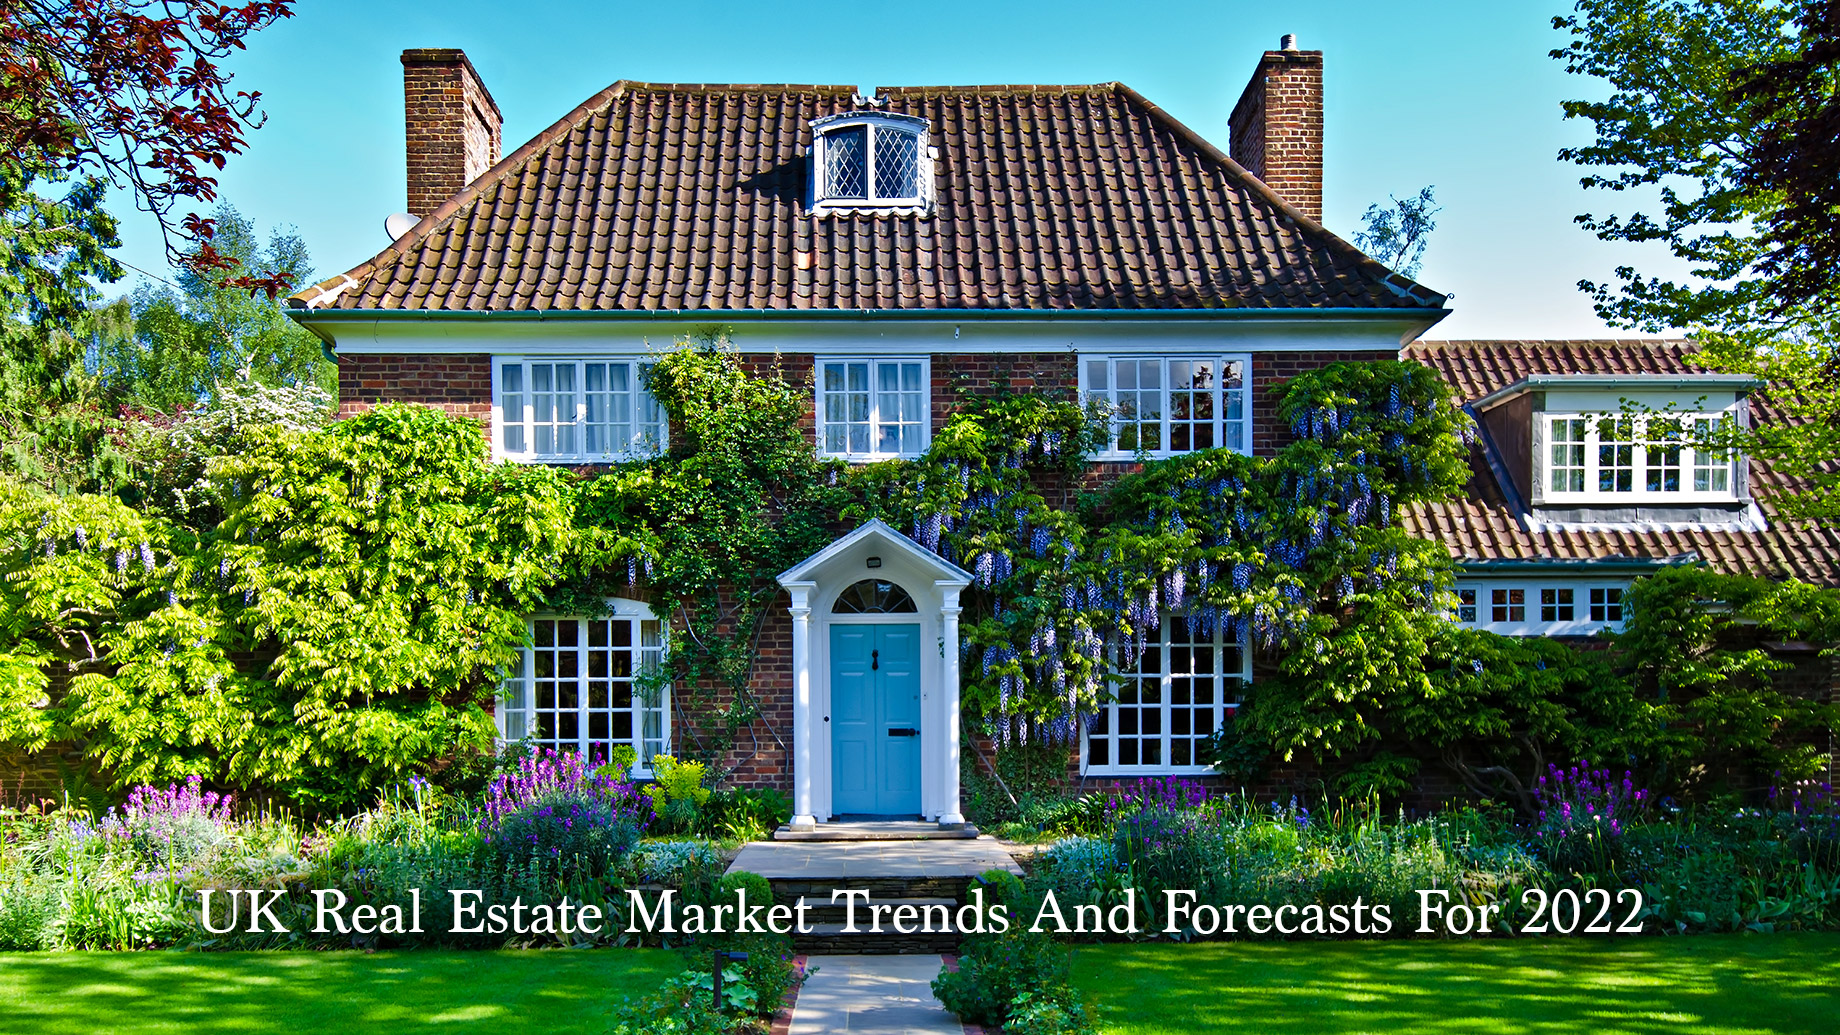 UK Real Estate Market Trends And Forecasts For 2022